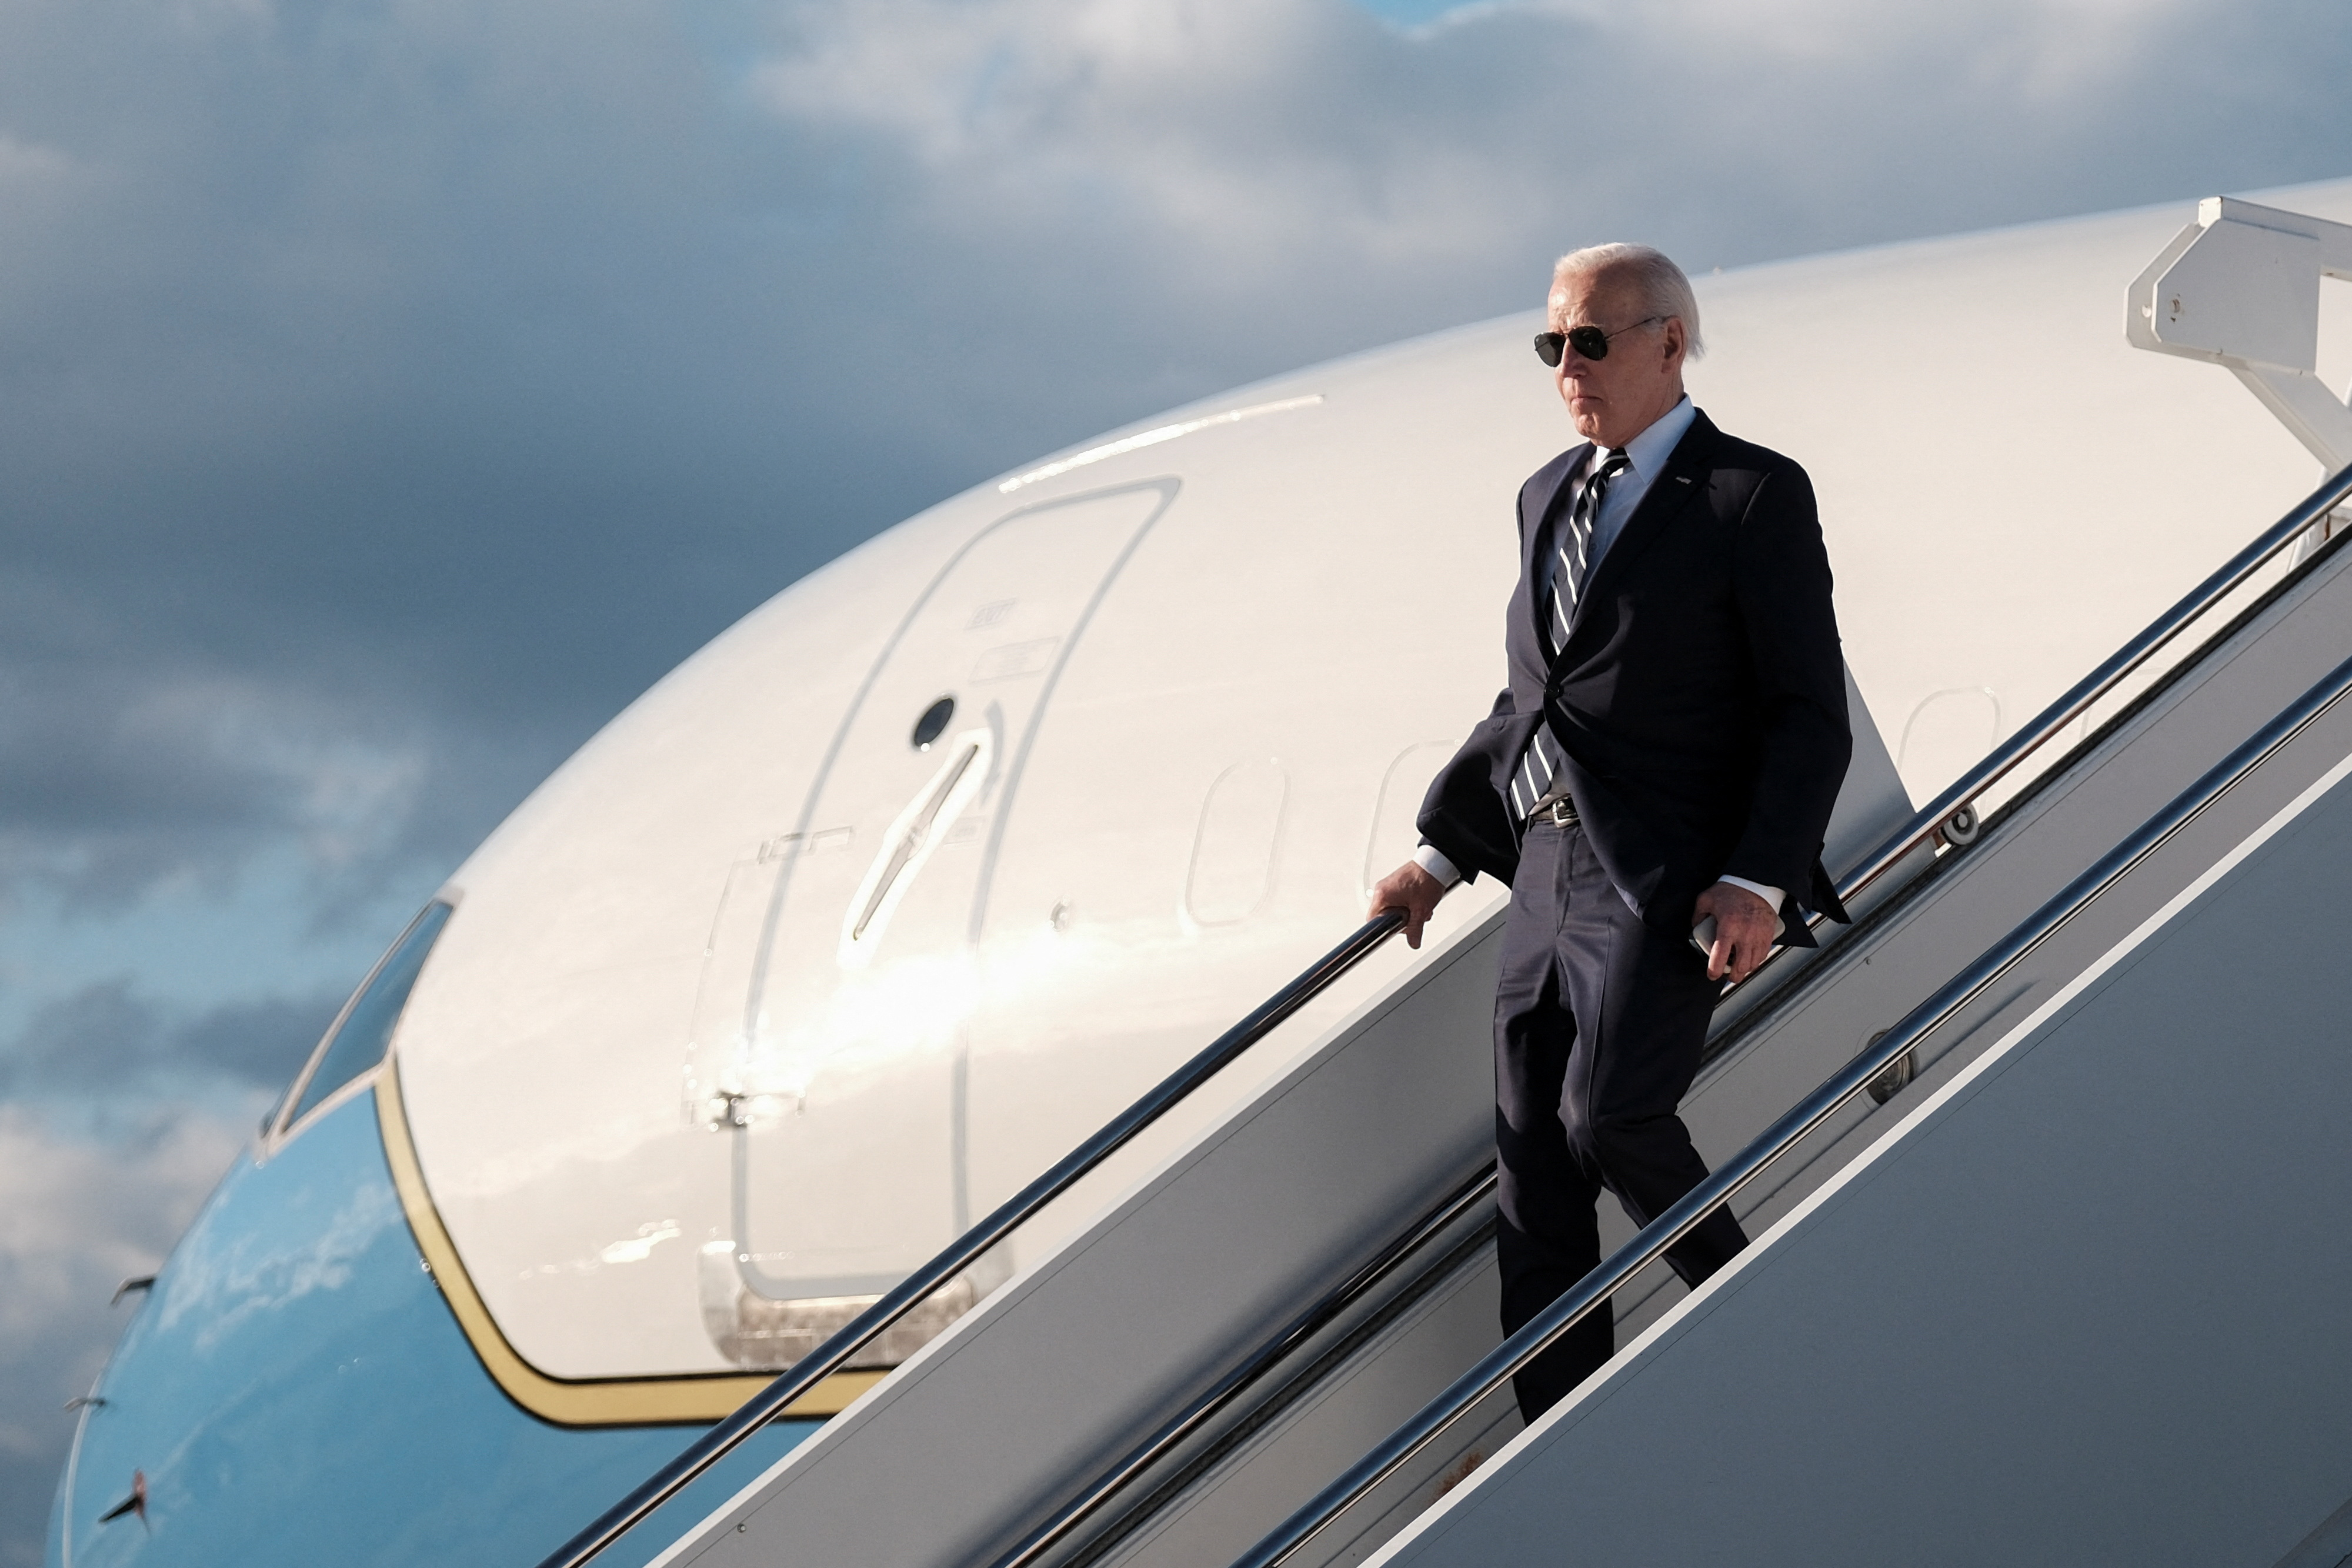 U.S. President Joe Biden disembarks from Air Force One at Dover Air Force Base, in Dover